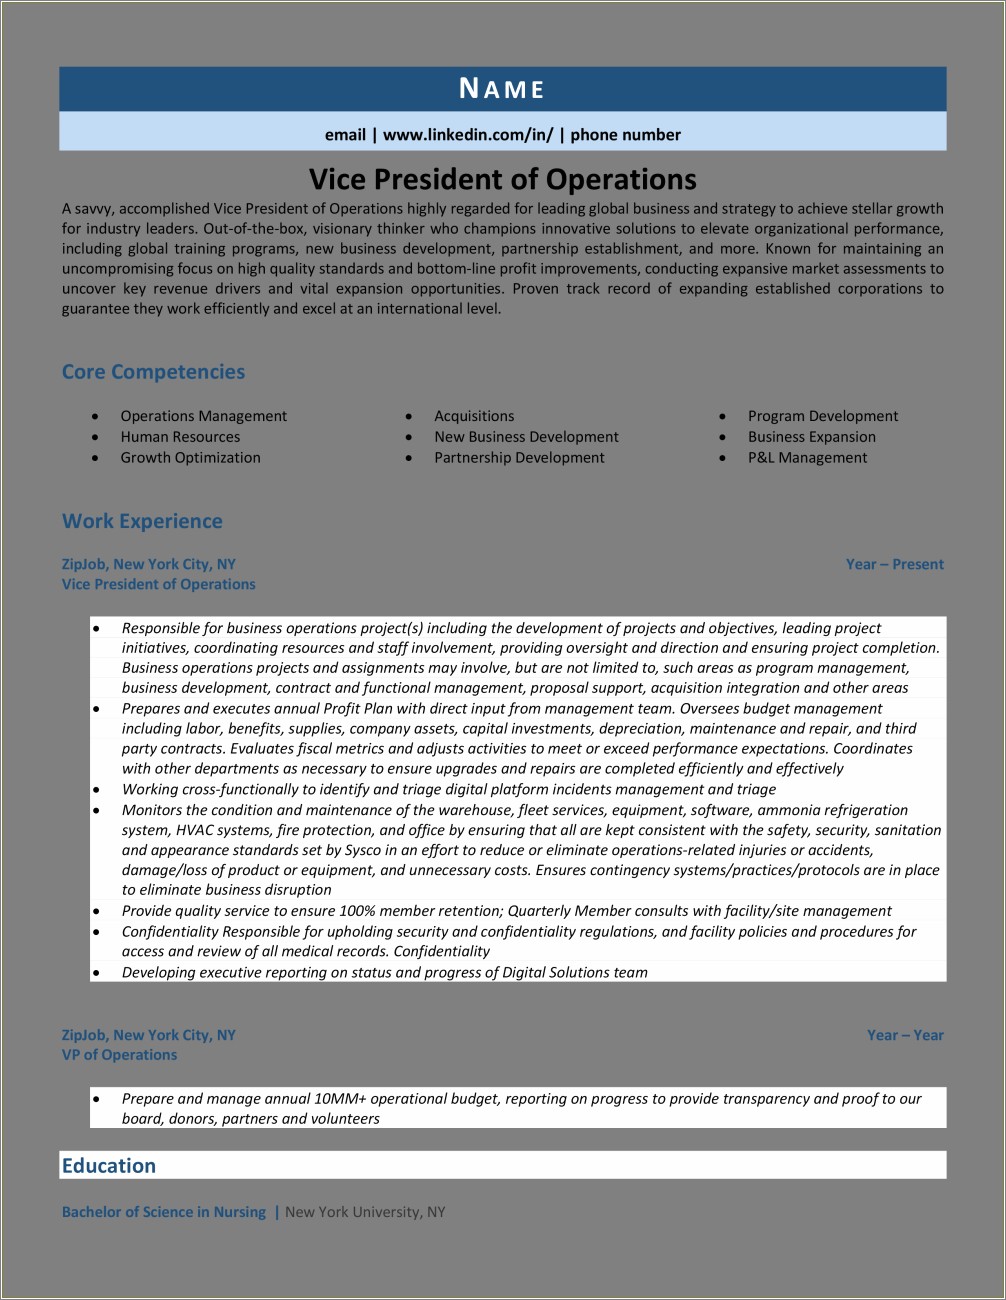 Resume Example For Vp Of Operations For Staffing